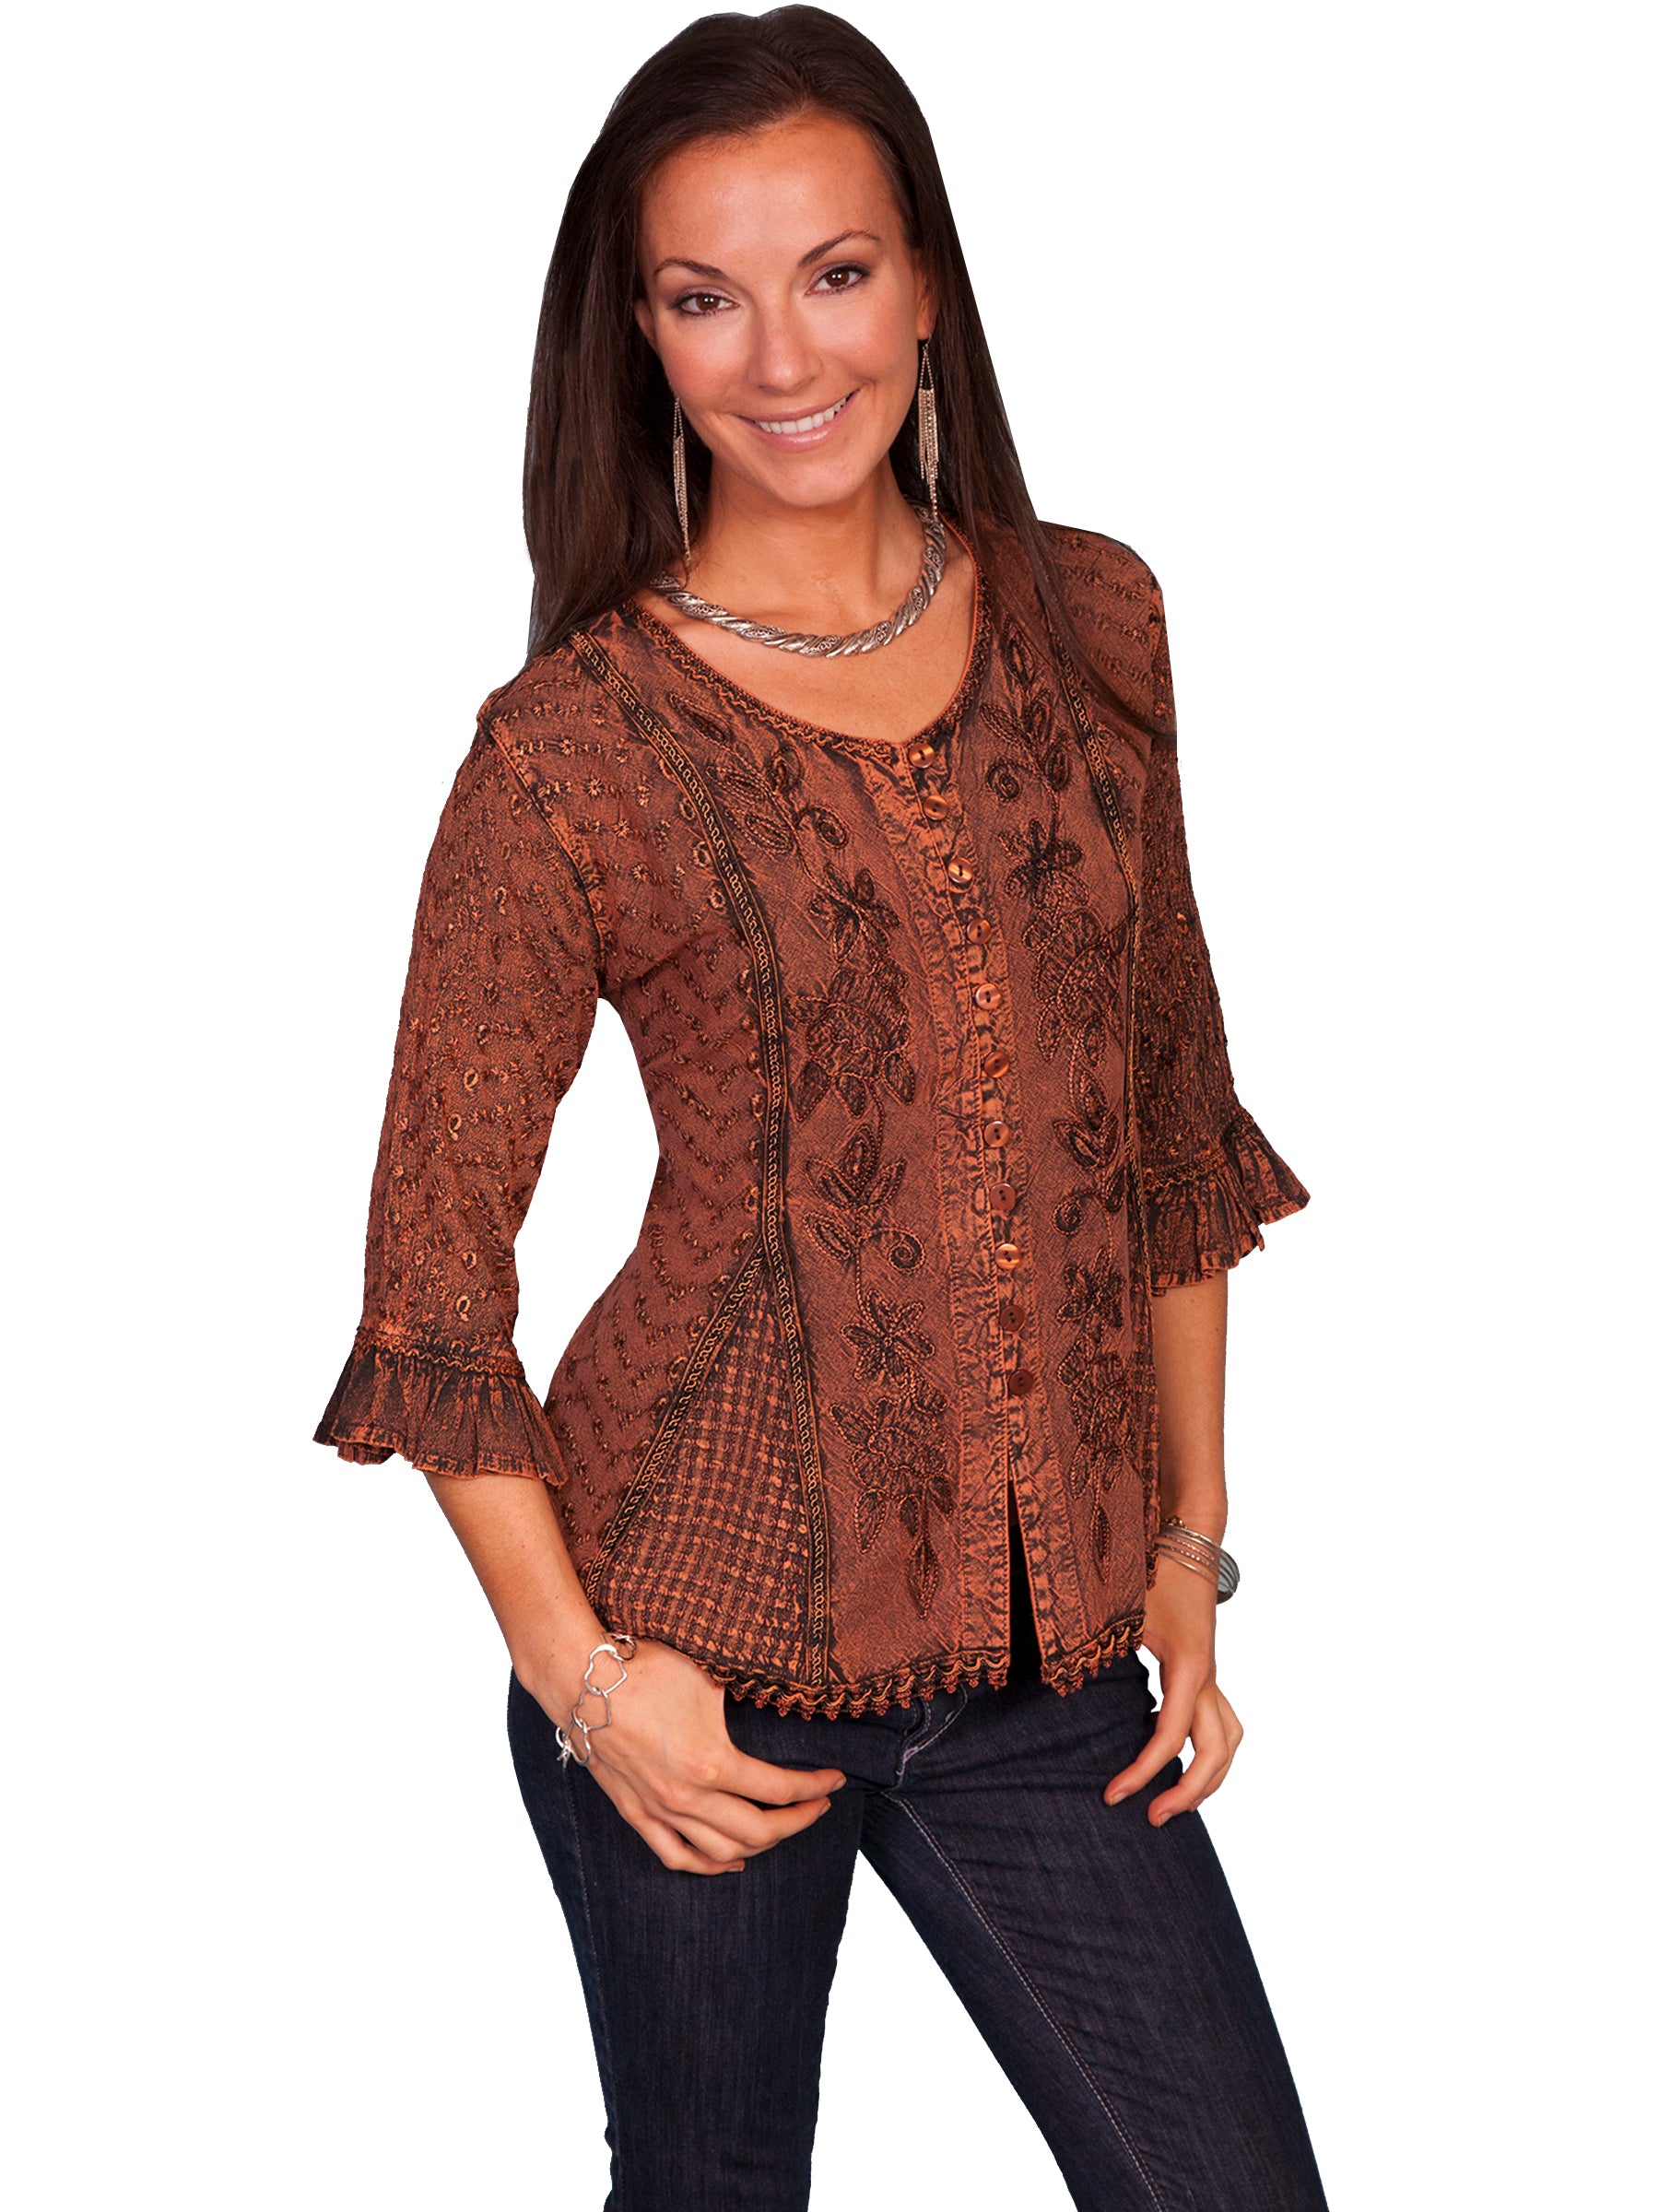 Honey Creek Blouse with 3/4 Sleeves, Ruffles, Buttons Copper Front XS-2XL